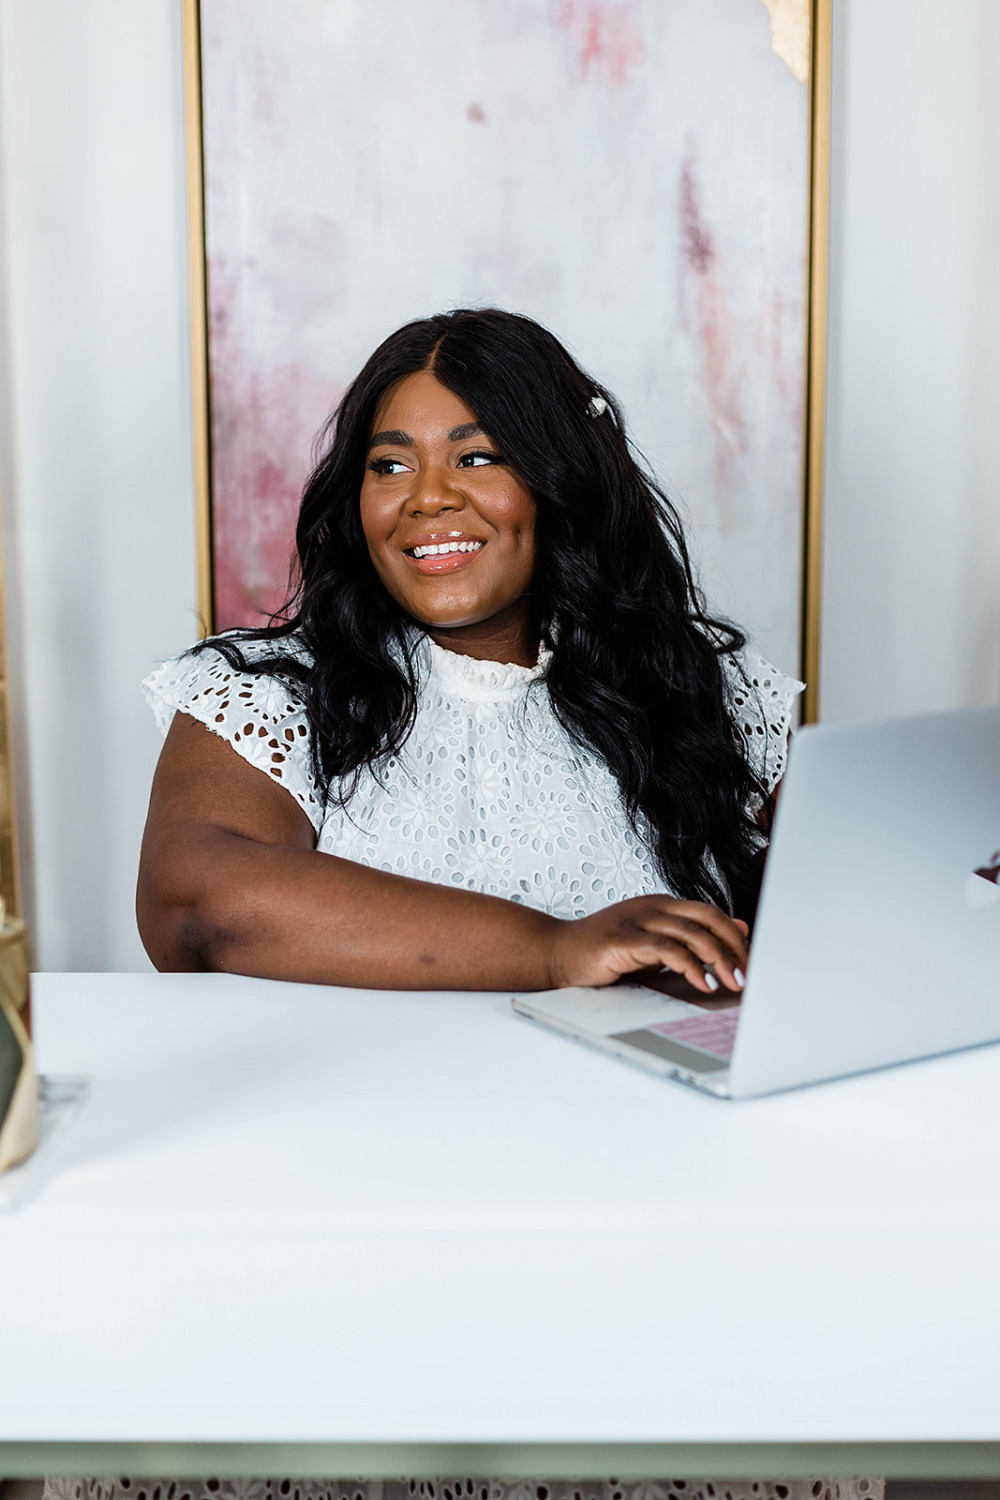 New Website, Smash Creative, Boho Blush Web Design, Musings of a Curvy Lady, Eloquii Puff Sleeve Dress, Cottage core, Plus Size cottage core dress, Black Woman On her Phone, Black Woman Shopping online, Black woman working in her home office smiling